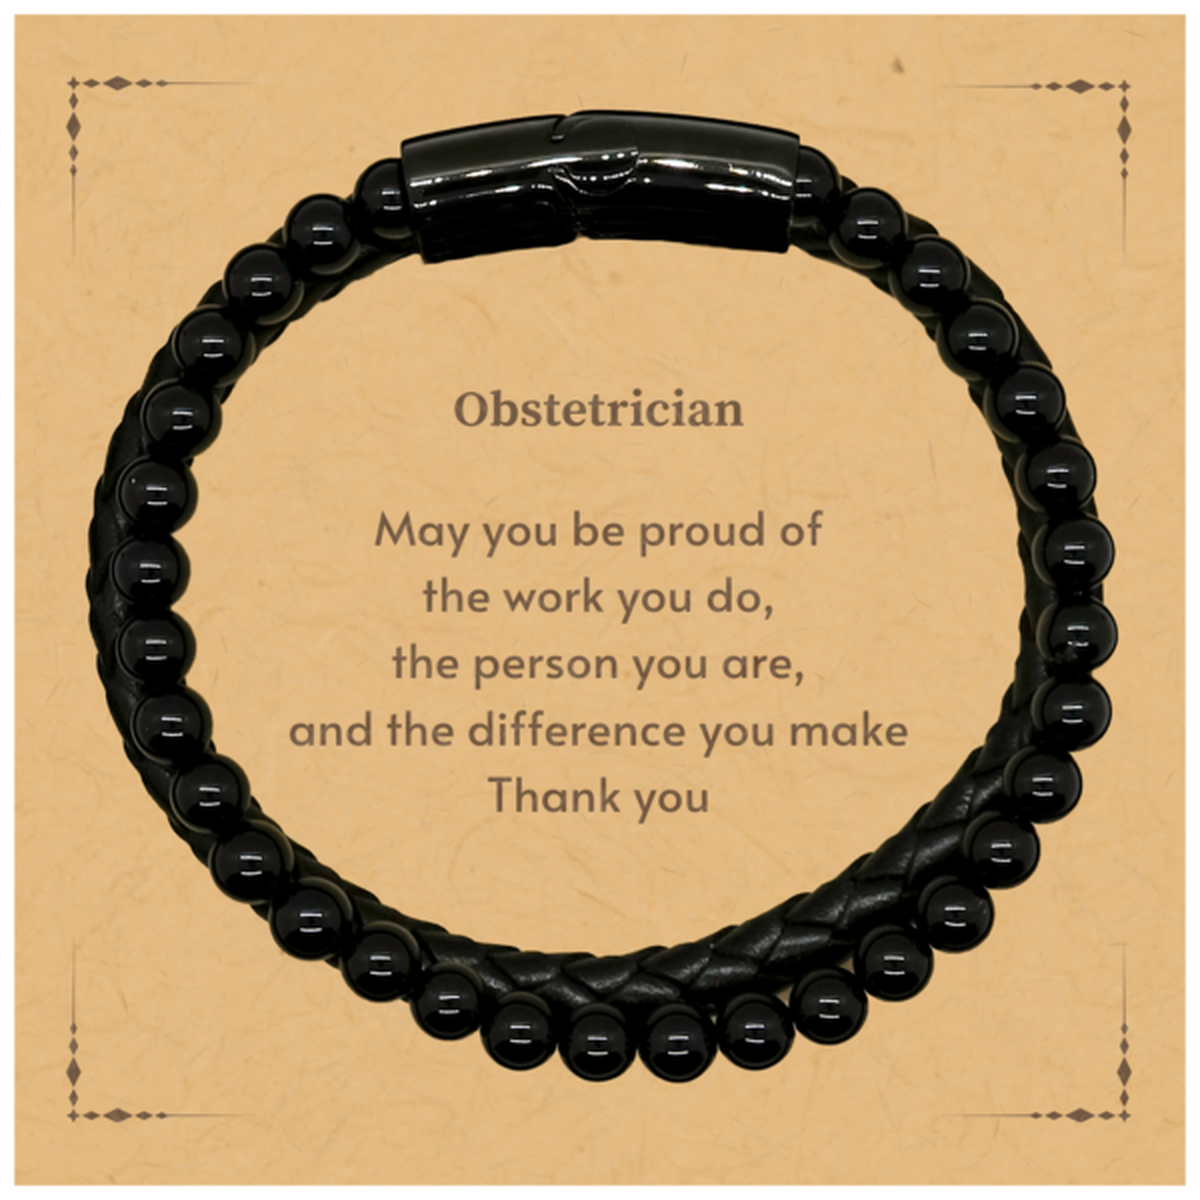 Heartwarming Stone Leather Bracelets Retirement Coworkers Gifts for Obstetrician, Obstetrician May You be proud of the work you do, the person you are Gifts for Boss Men Women Friends